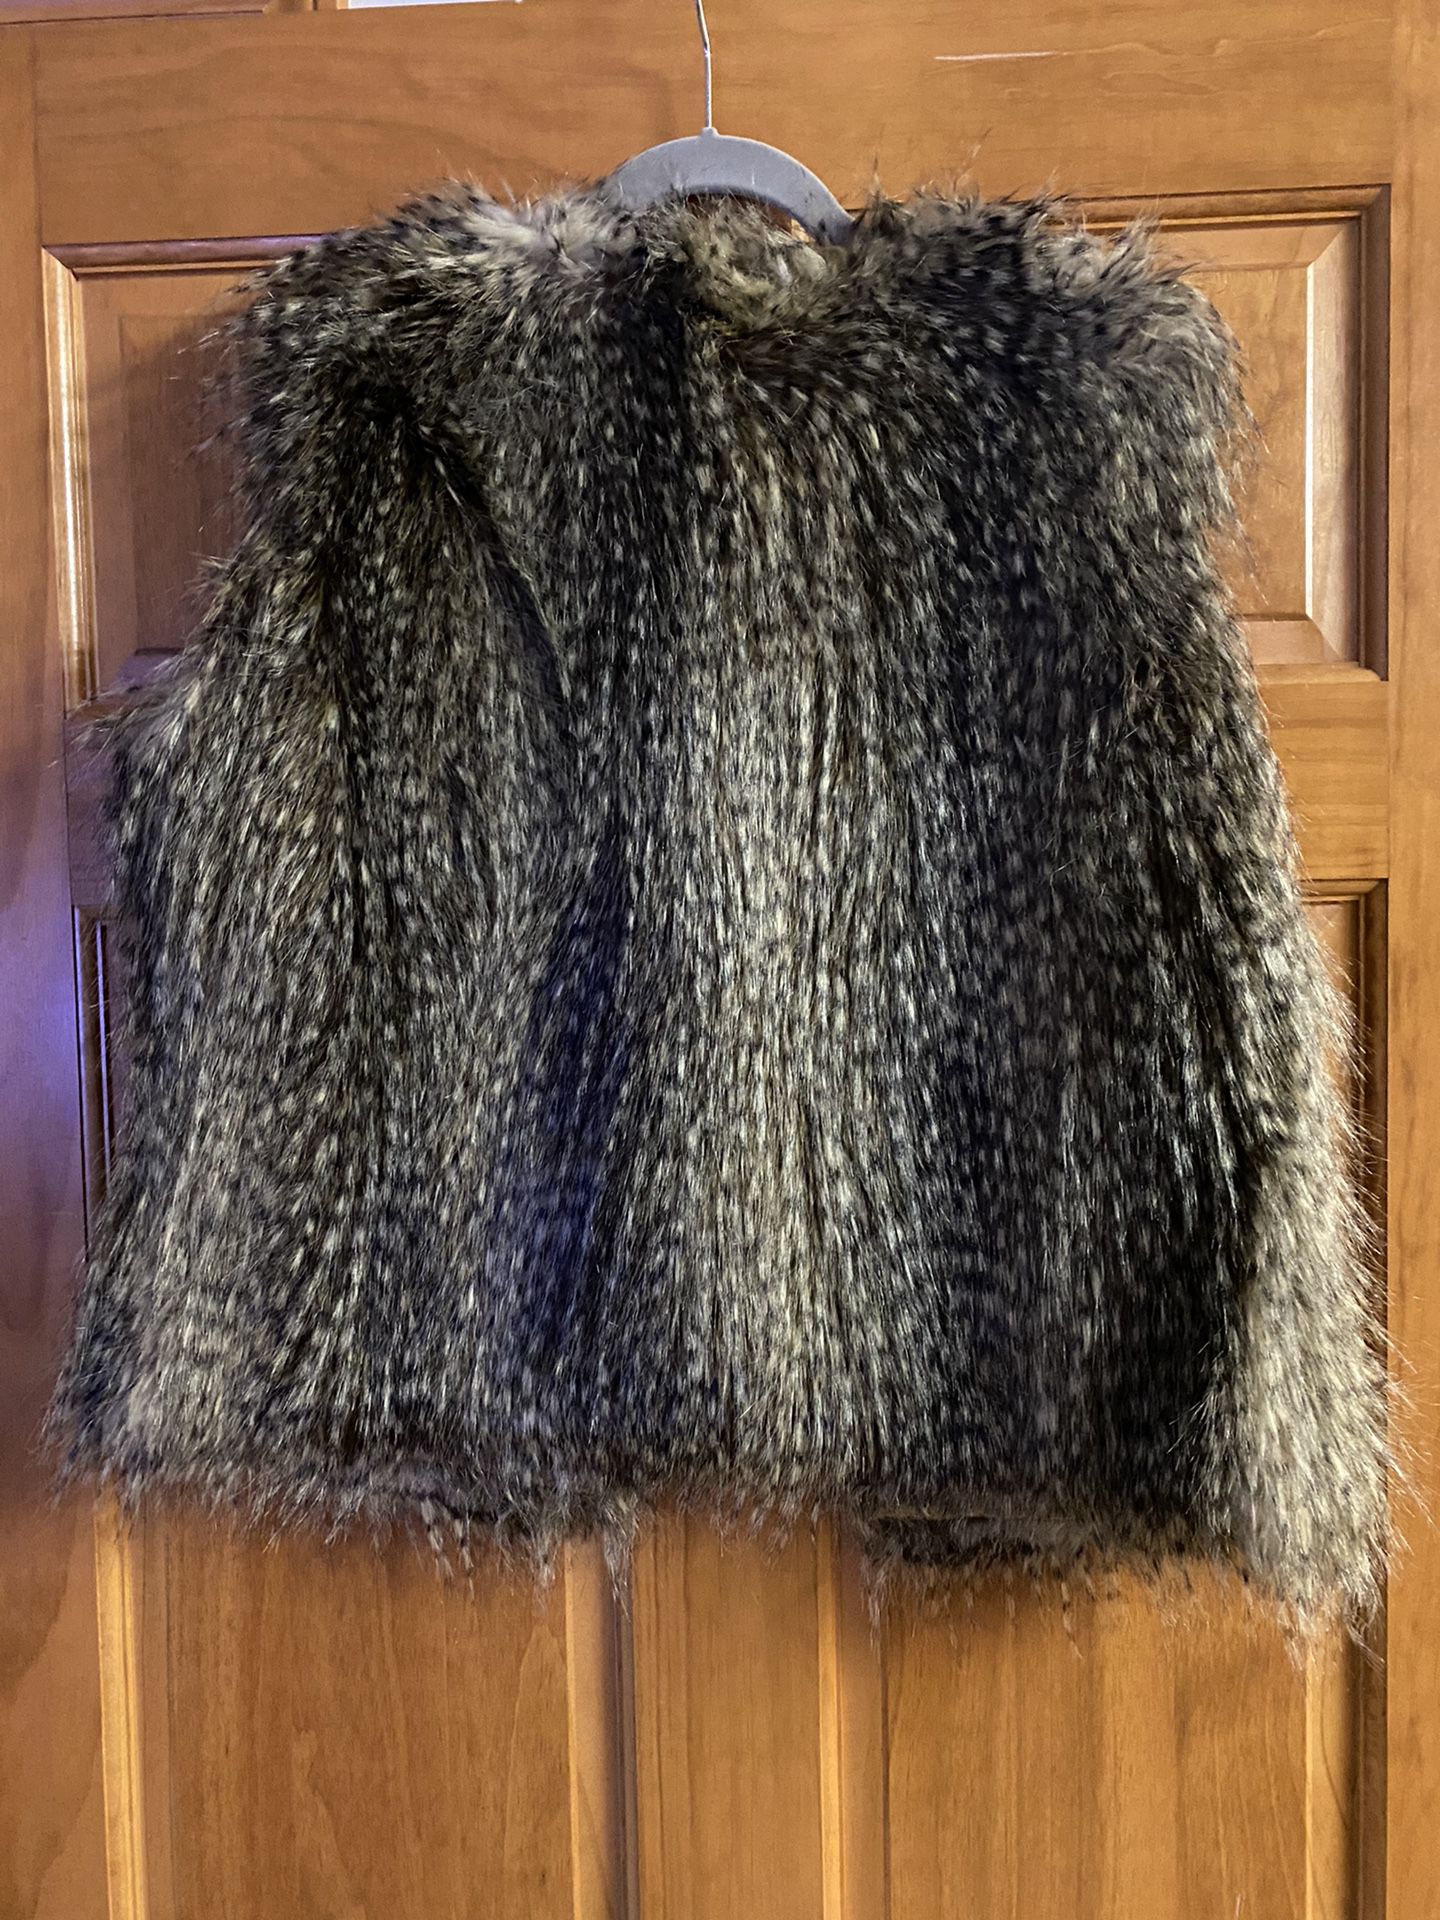 Express Faux Fur Vest- perfect for Fall!